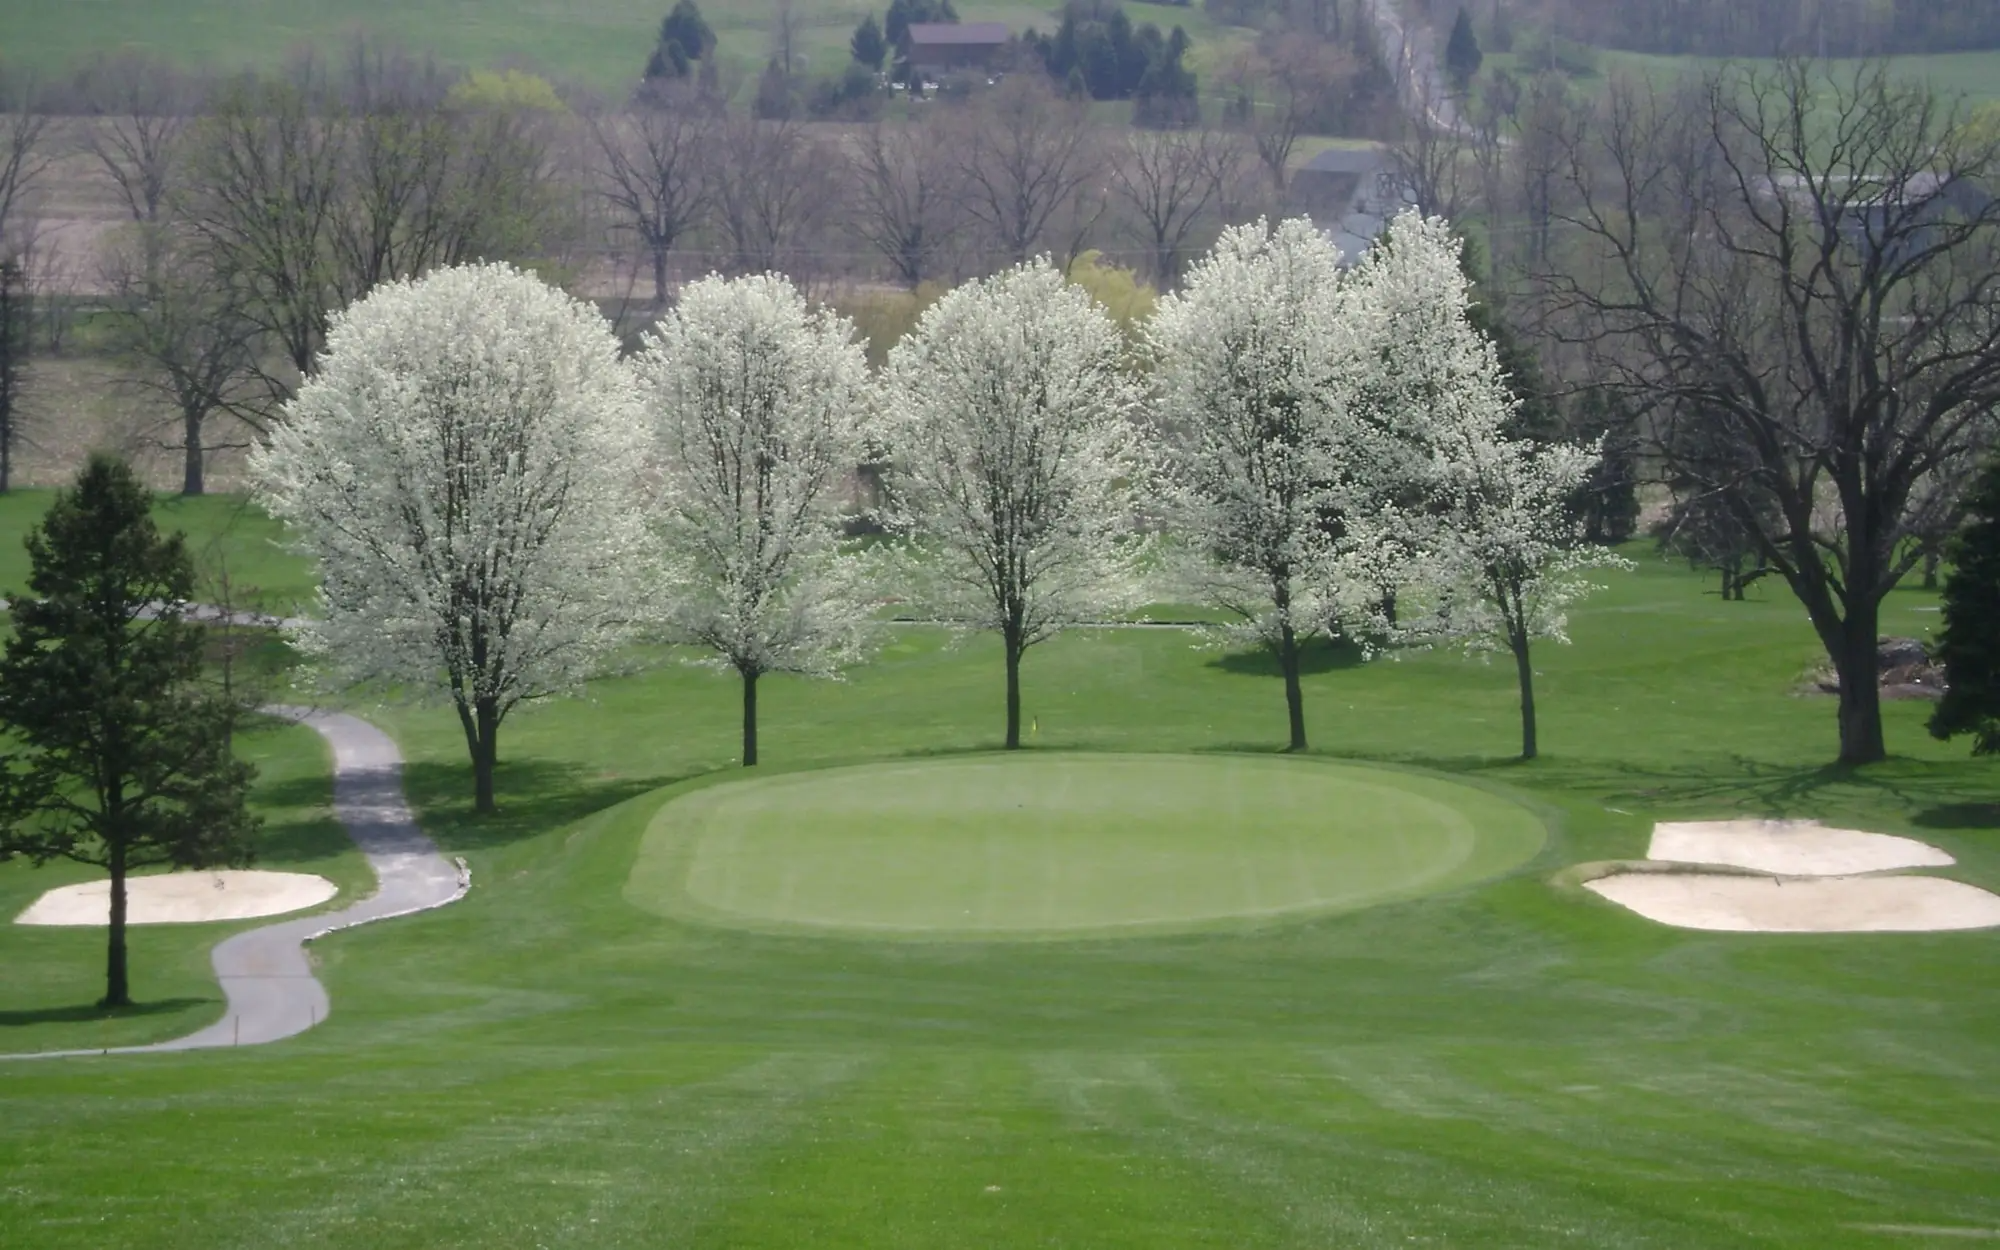 View of trees on golf course green